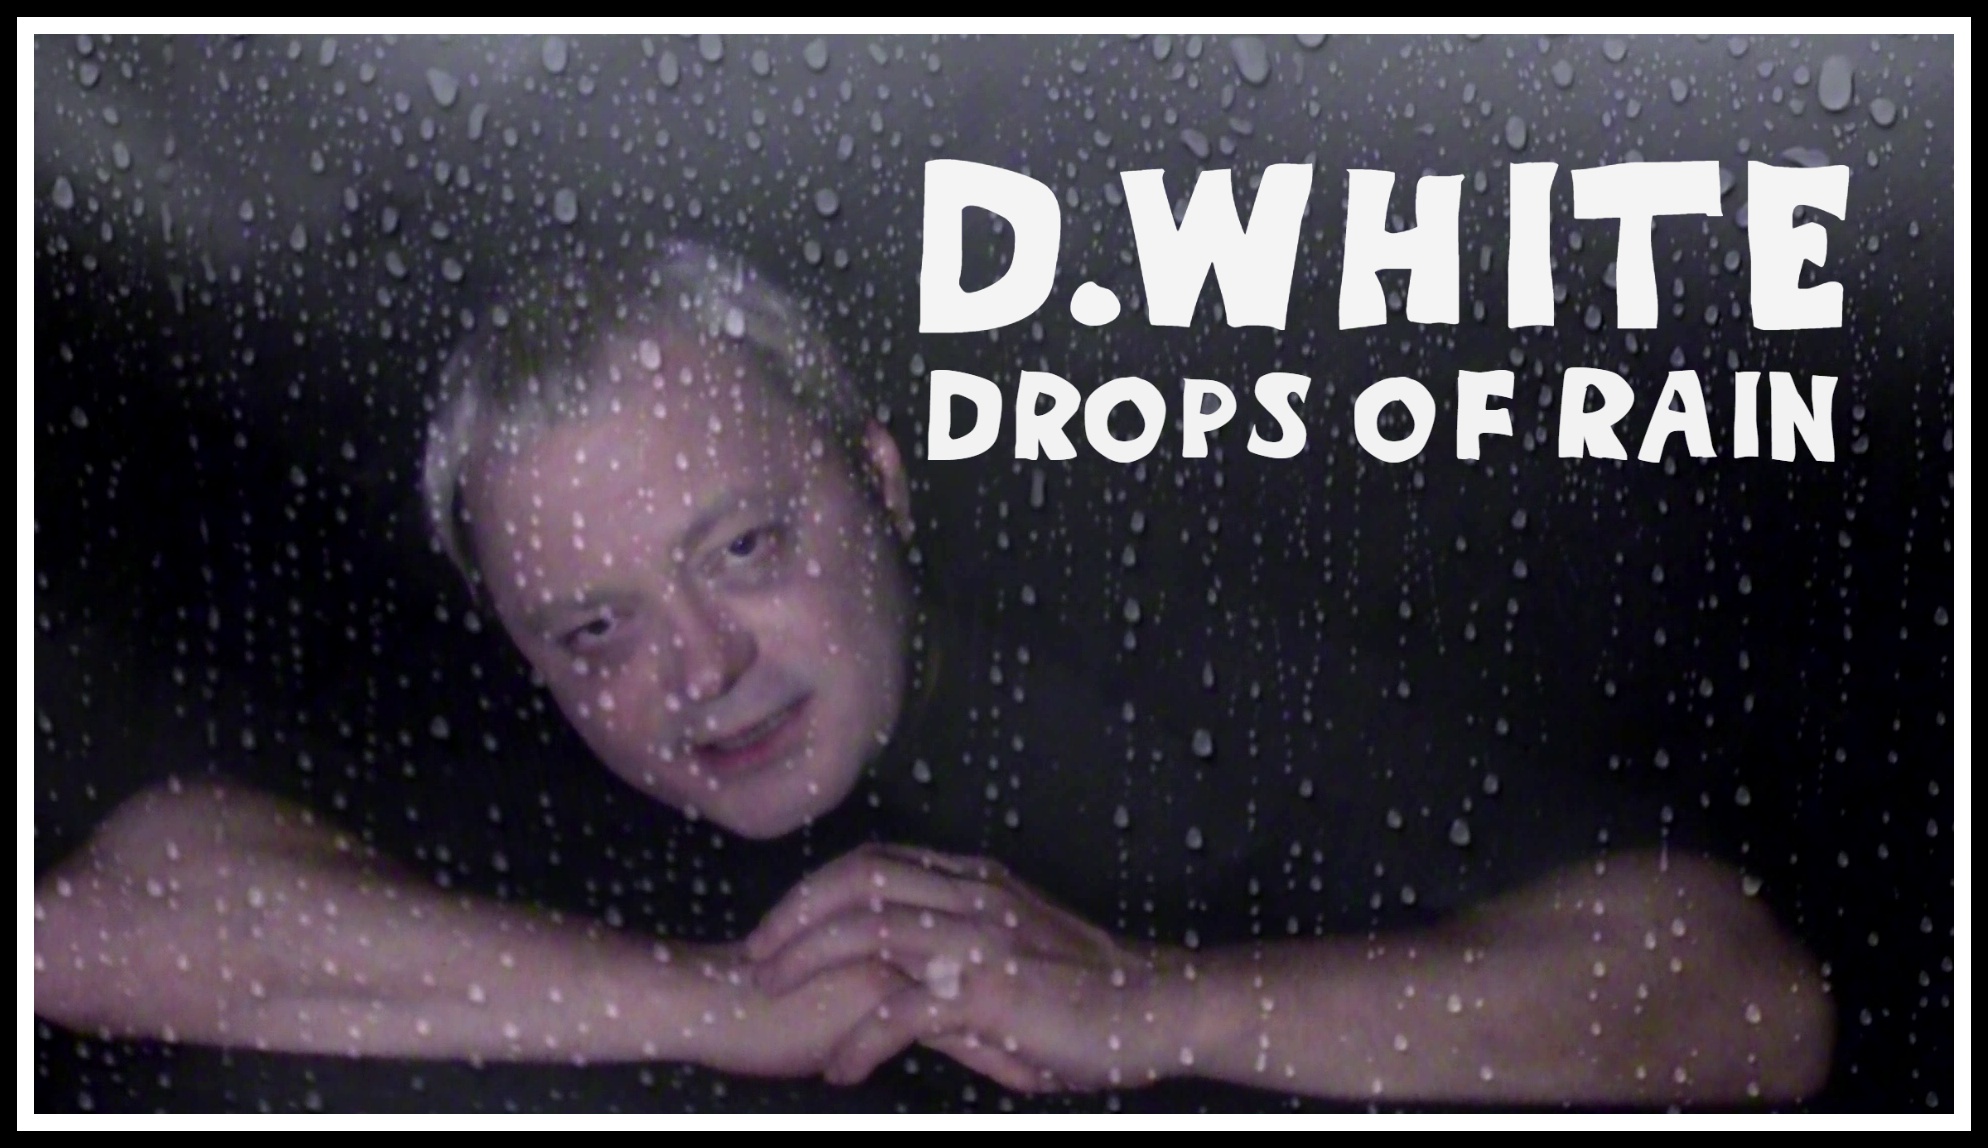 D.White - Drops of Rain (Official Music Video). Song in the style of the 80s and 90s. New Age